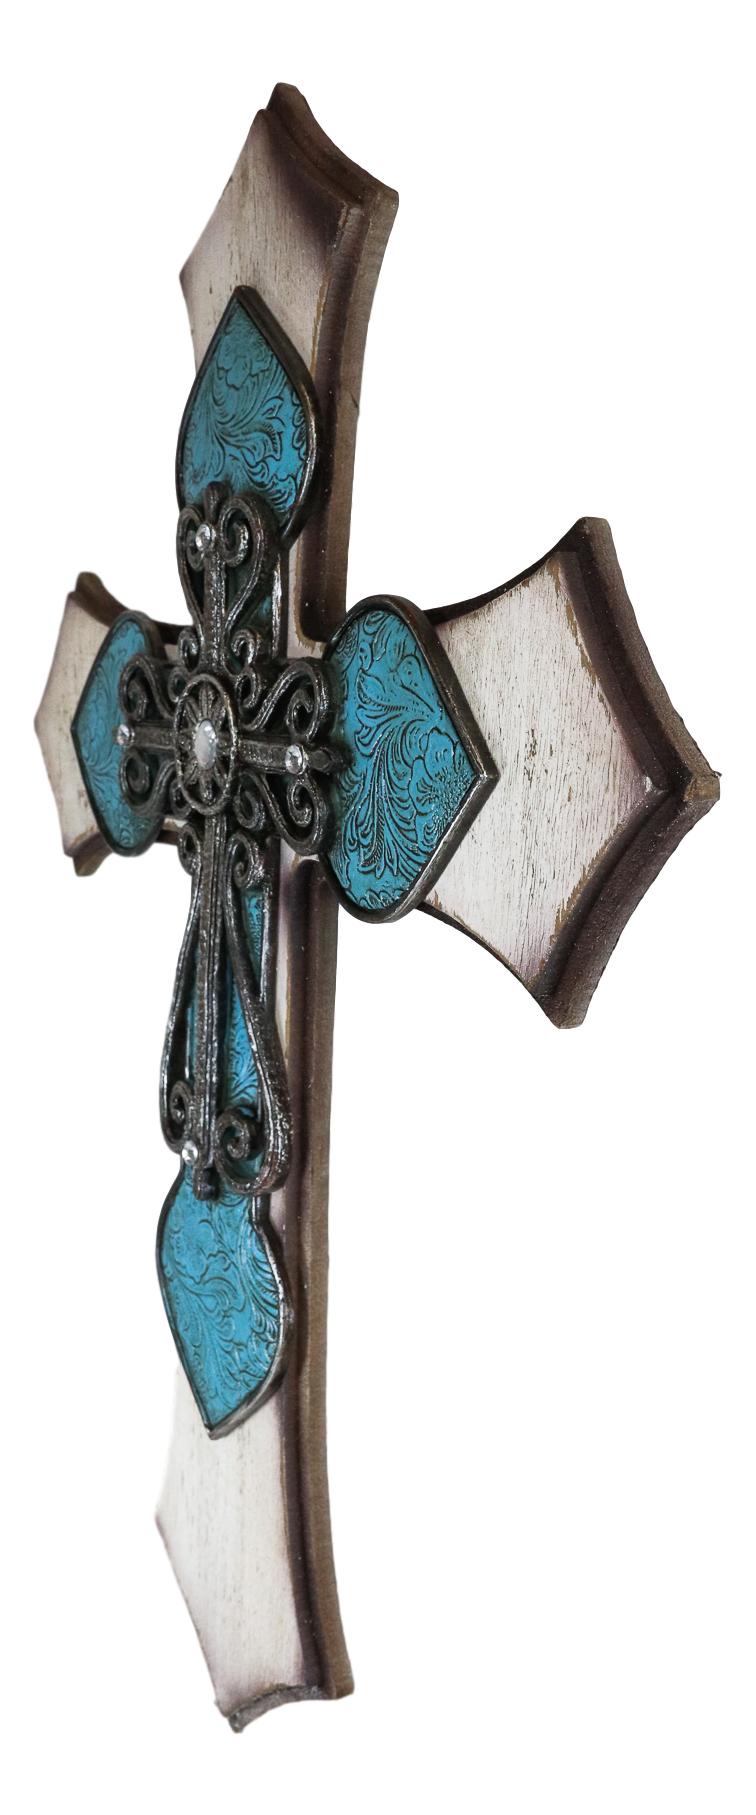 Large Rustic Western Crystal Floral Turquoise Occitan Spade Layered Wall Cross